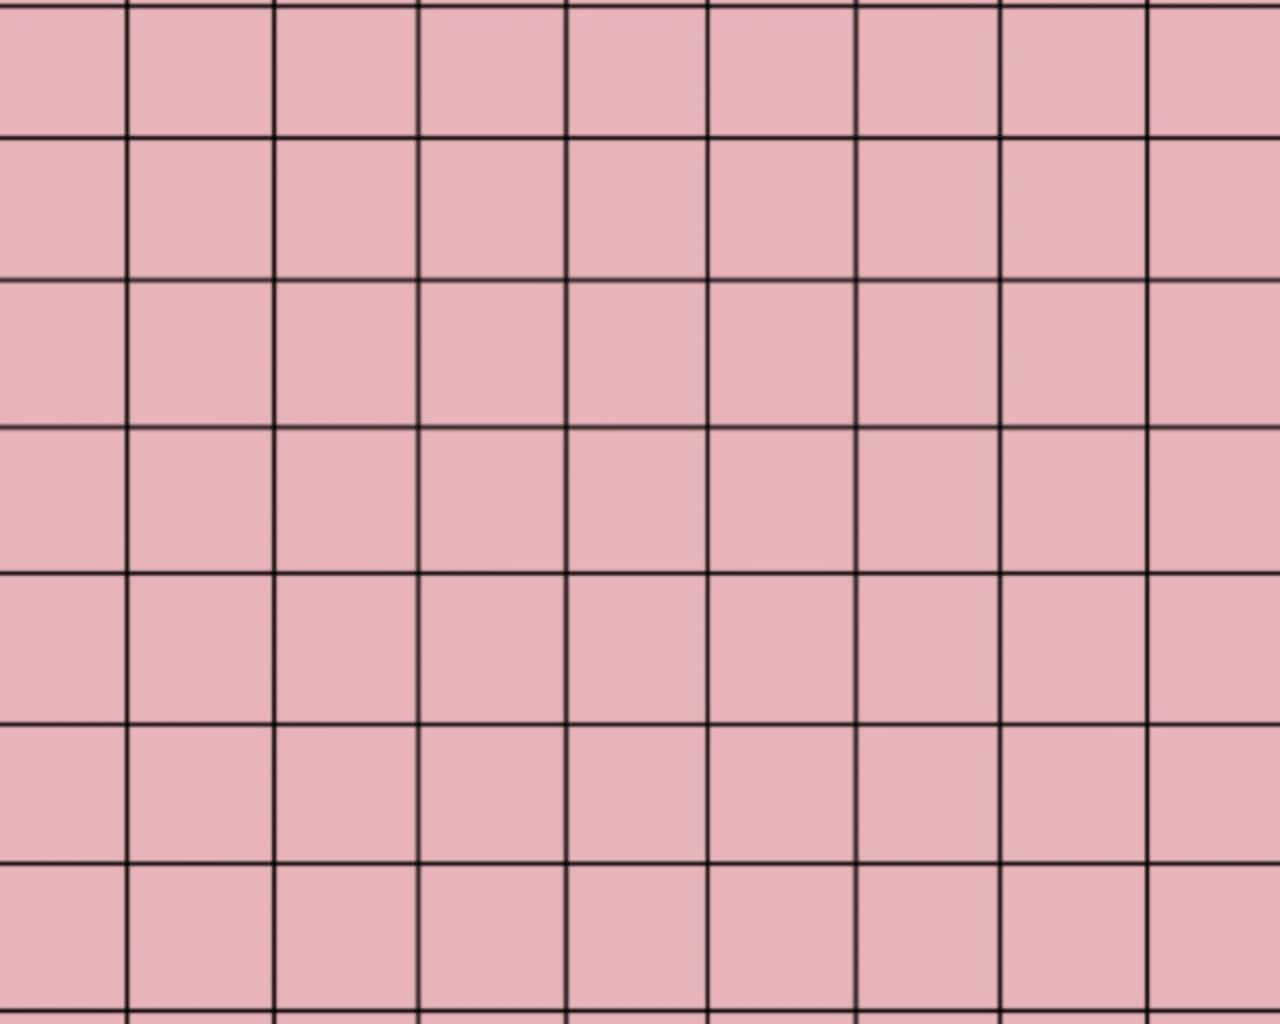 Pink grid background with a black grid - 1280x1024, grid